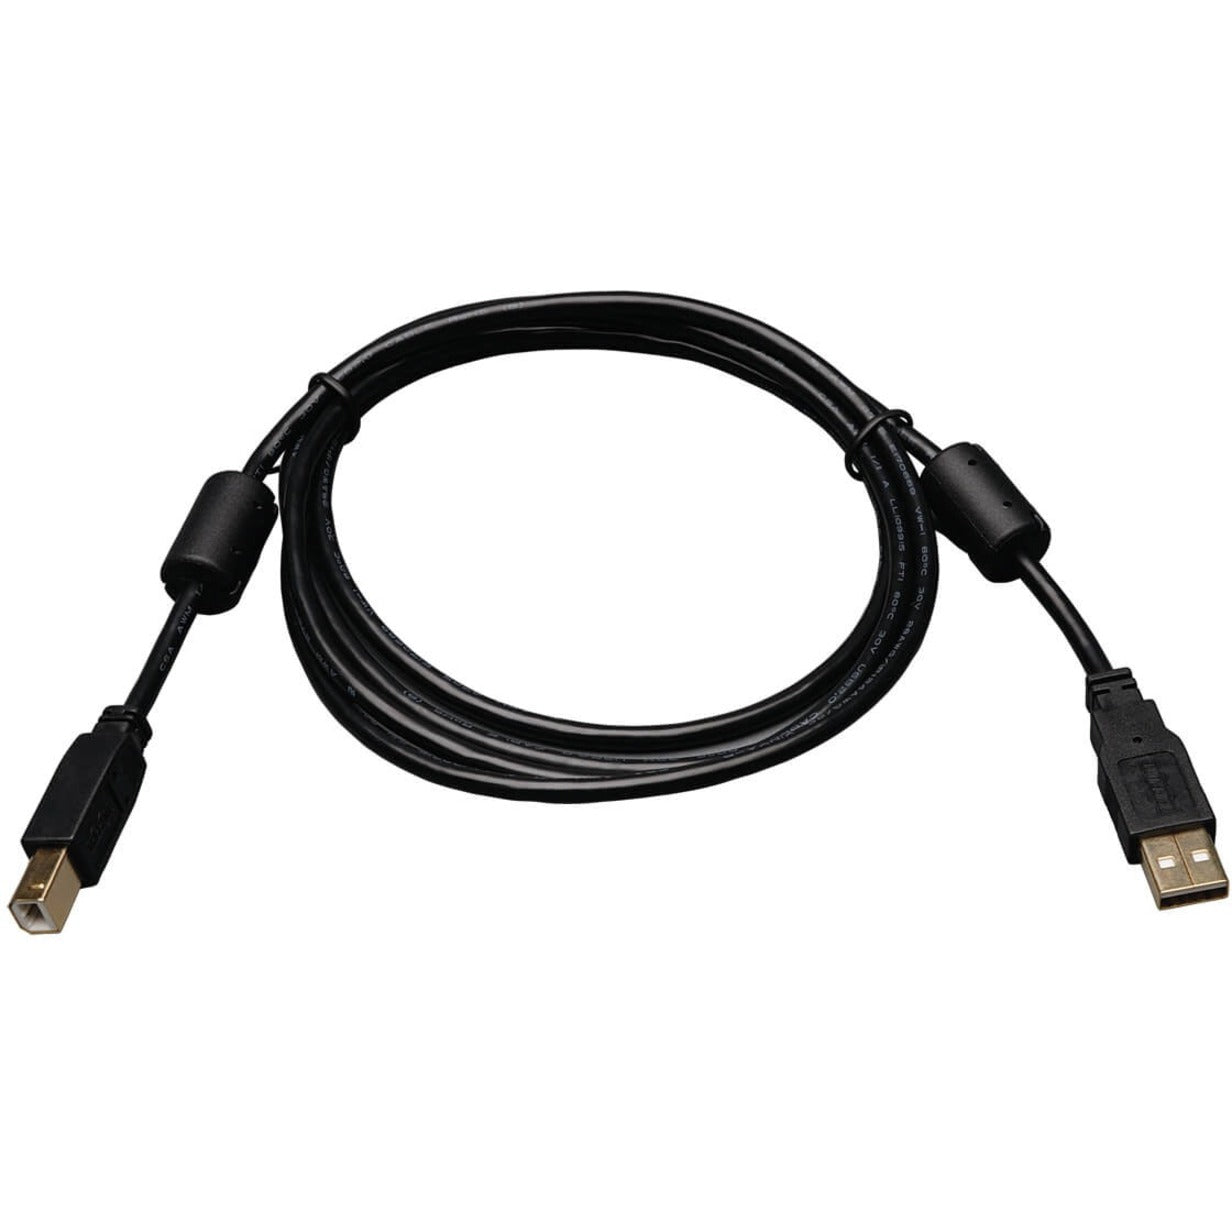 Tripp Lite U023-006 6-ft. USB2.0 A/B Gold Device Cable with Ferrite Chokes, Data Transfer Cable